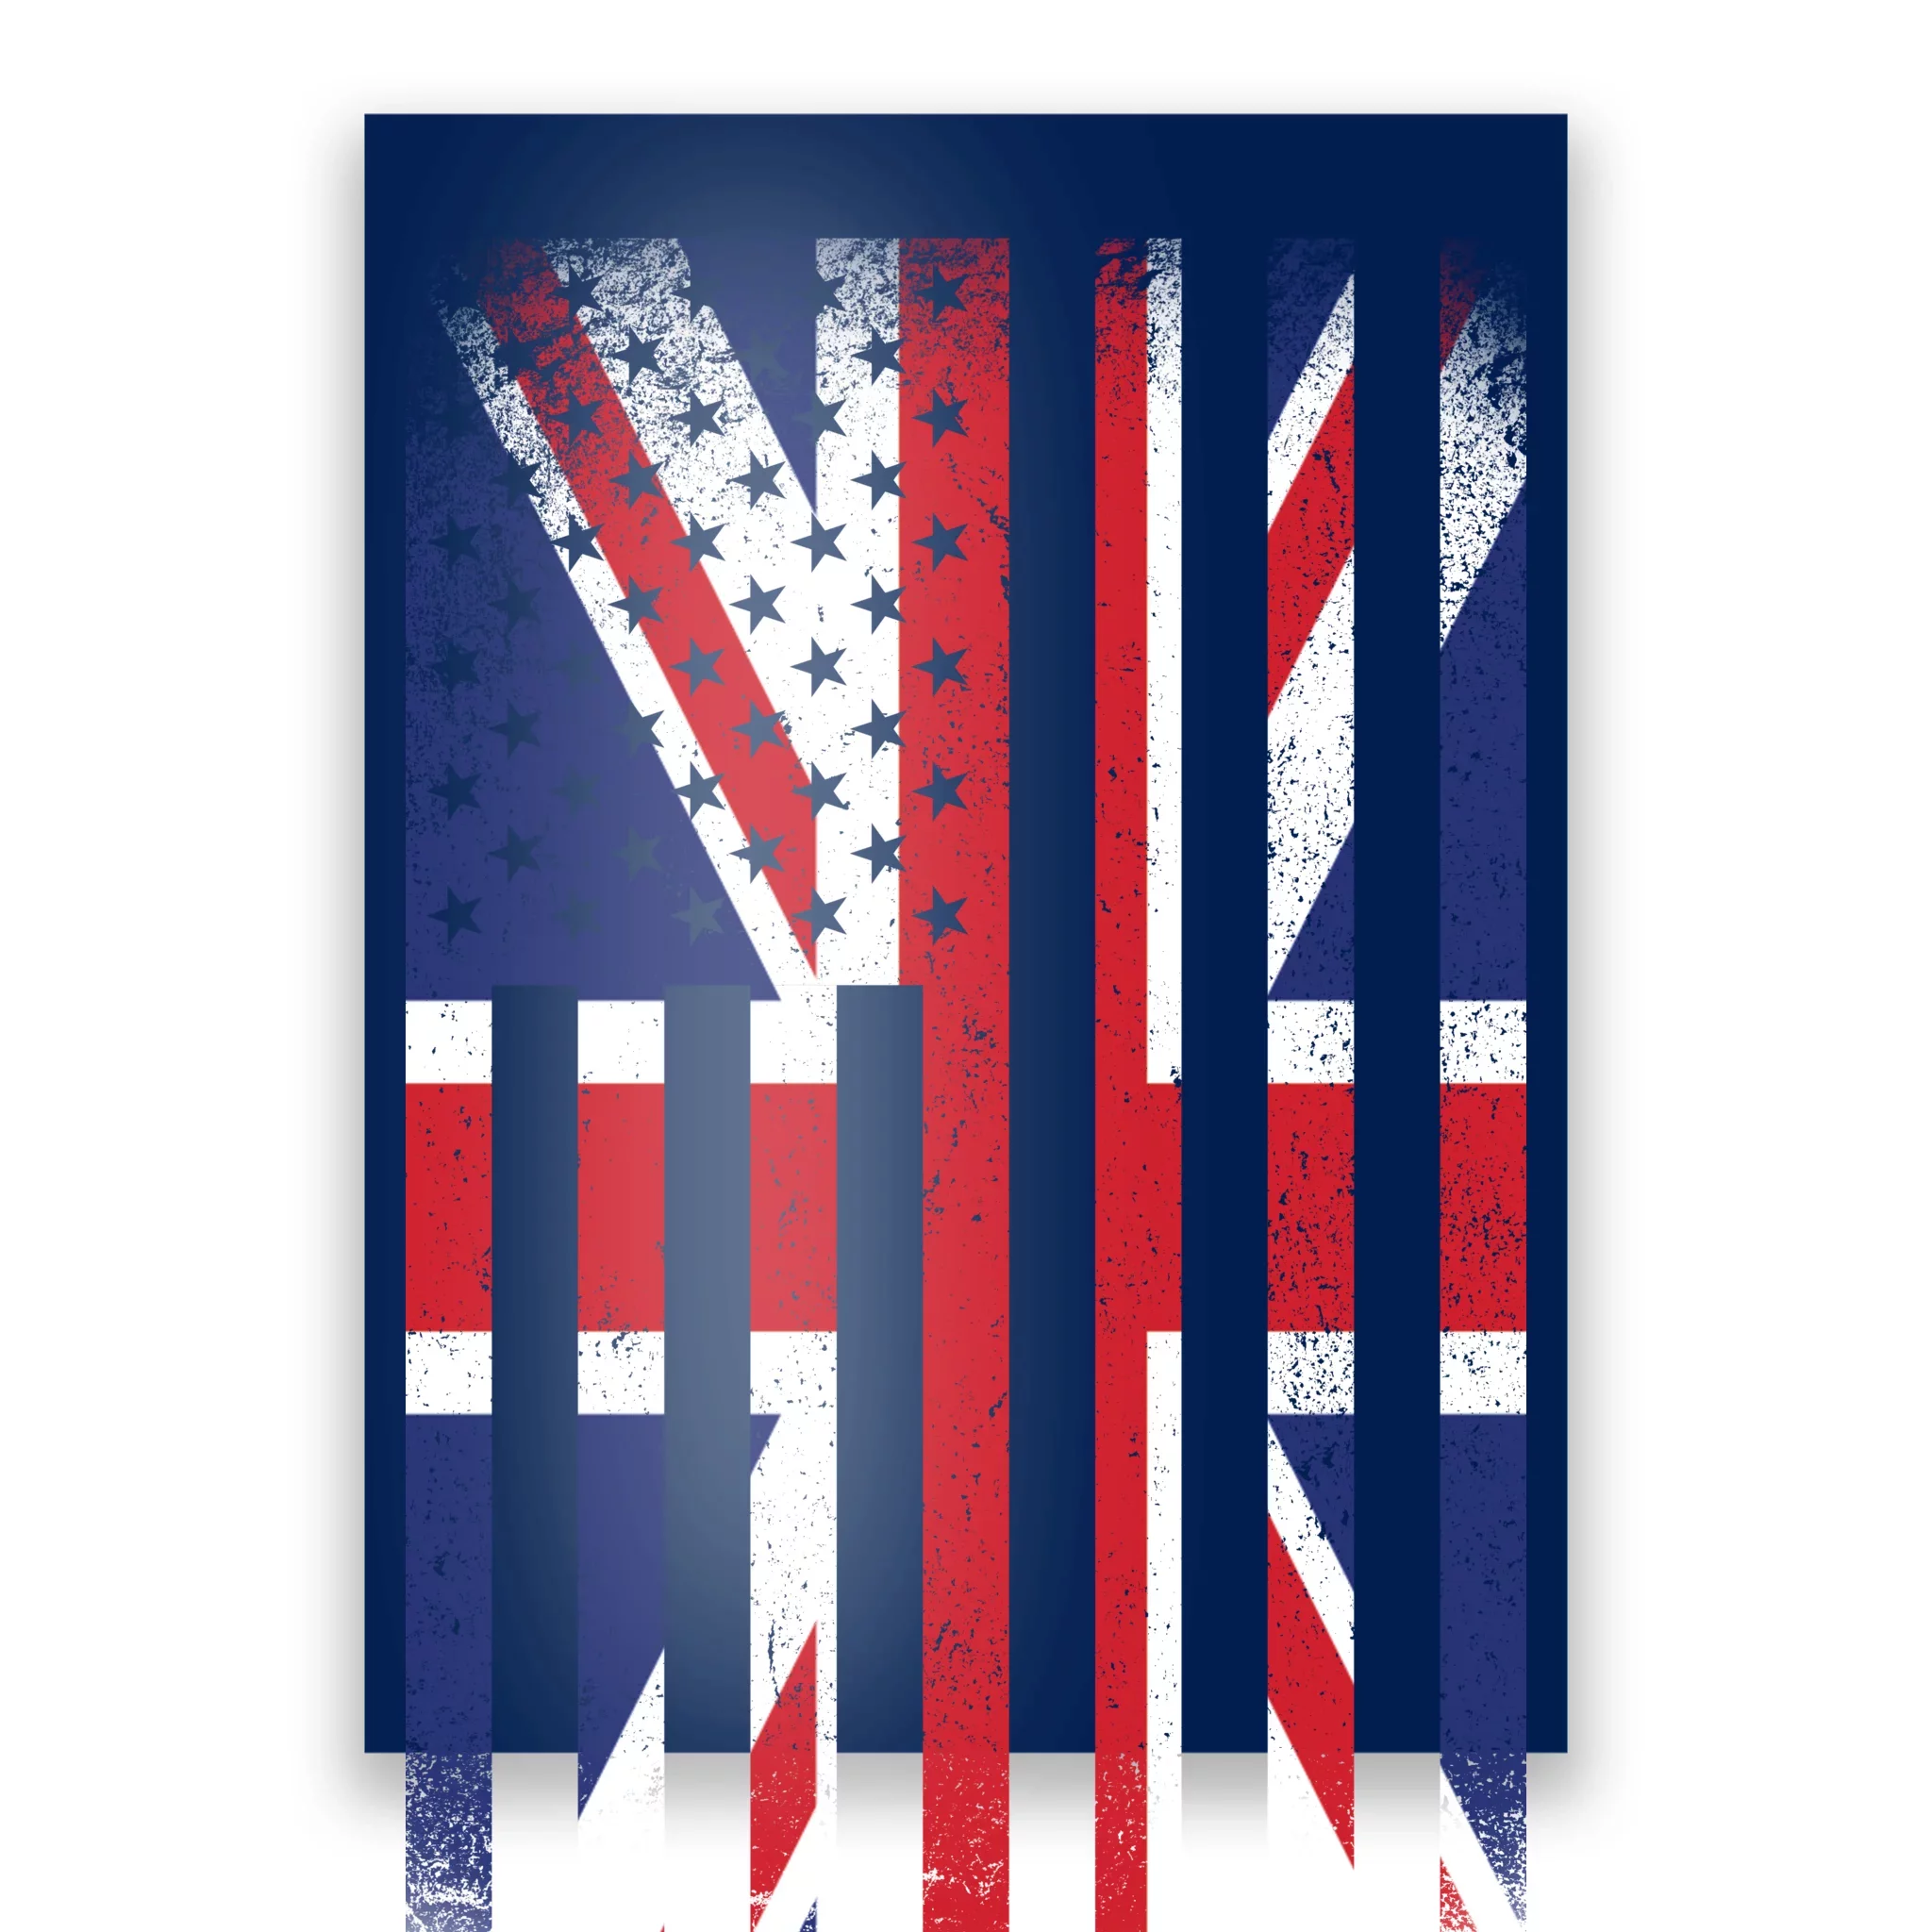 iPhoneXpapers.com | iPhone X wallpaper |  as02-brexit-euro-cool-nice-art-illustration